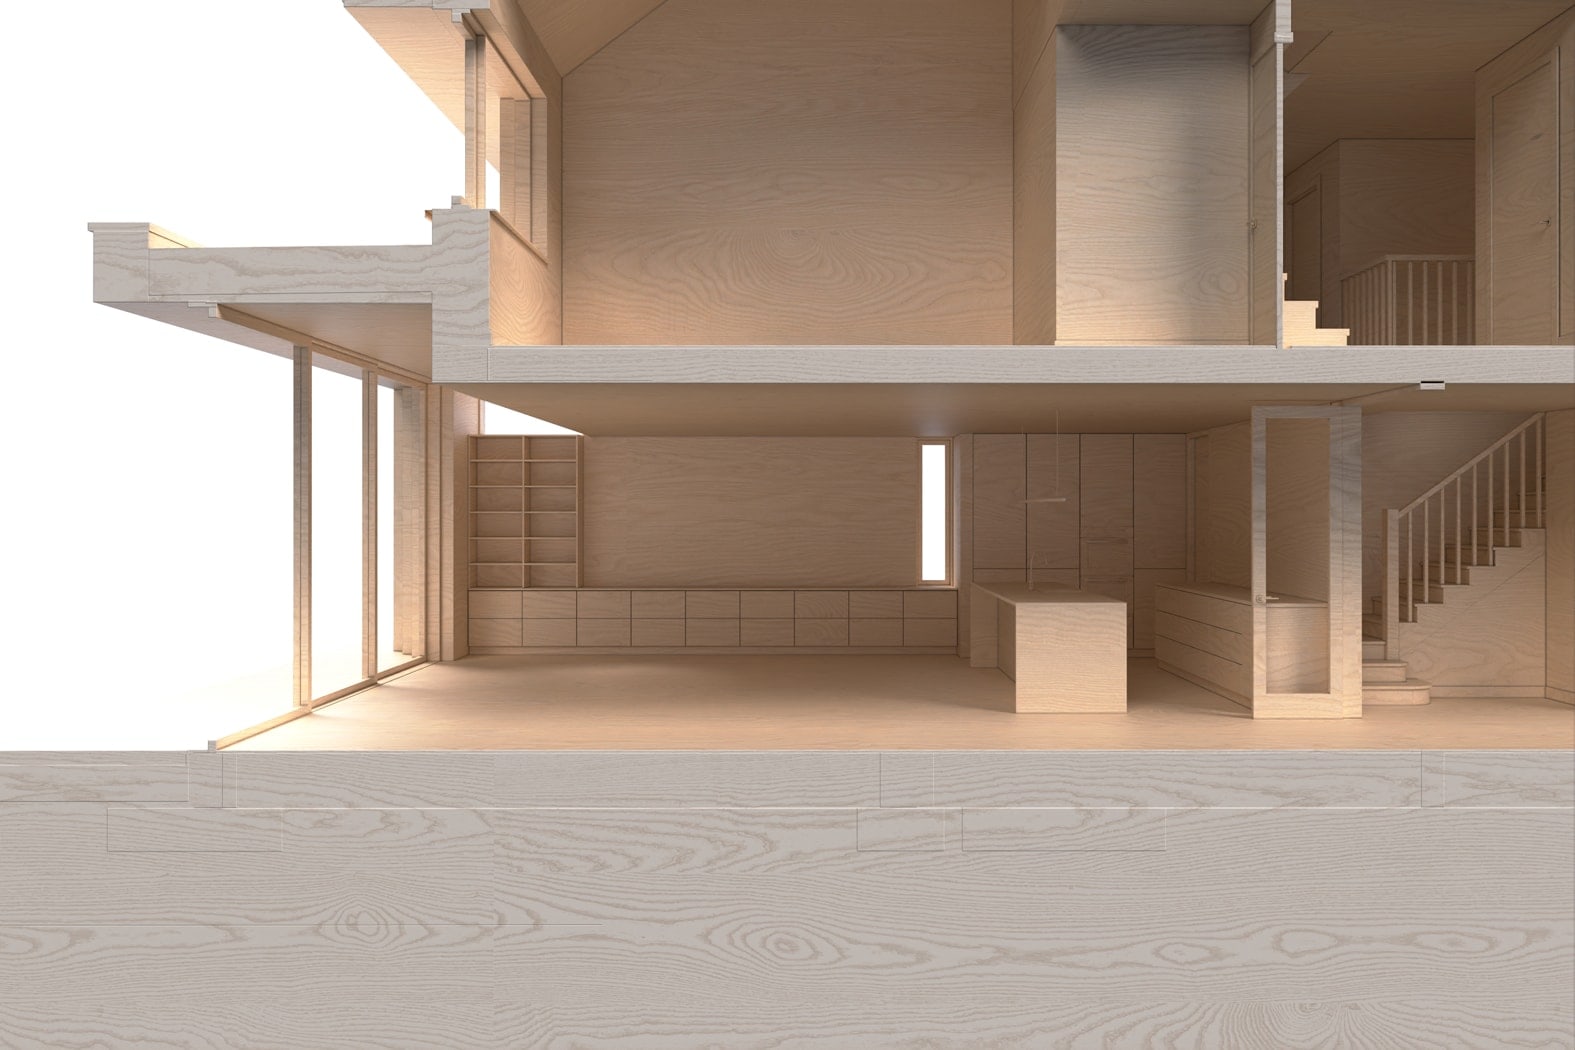 Cross-sectional view through kitchen, dining, living area